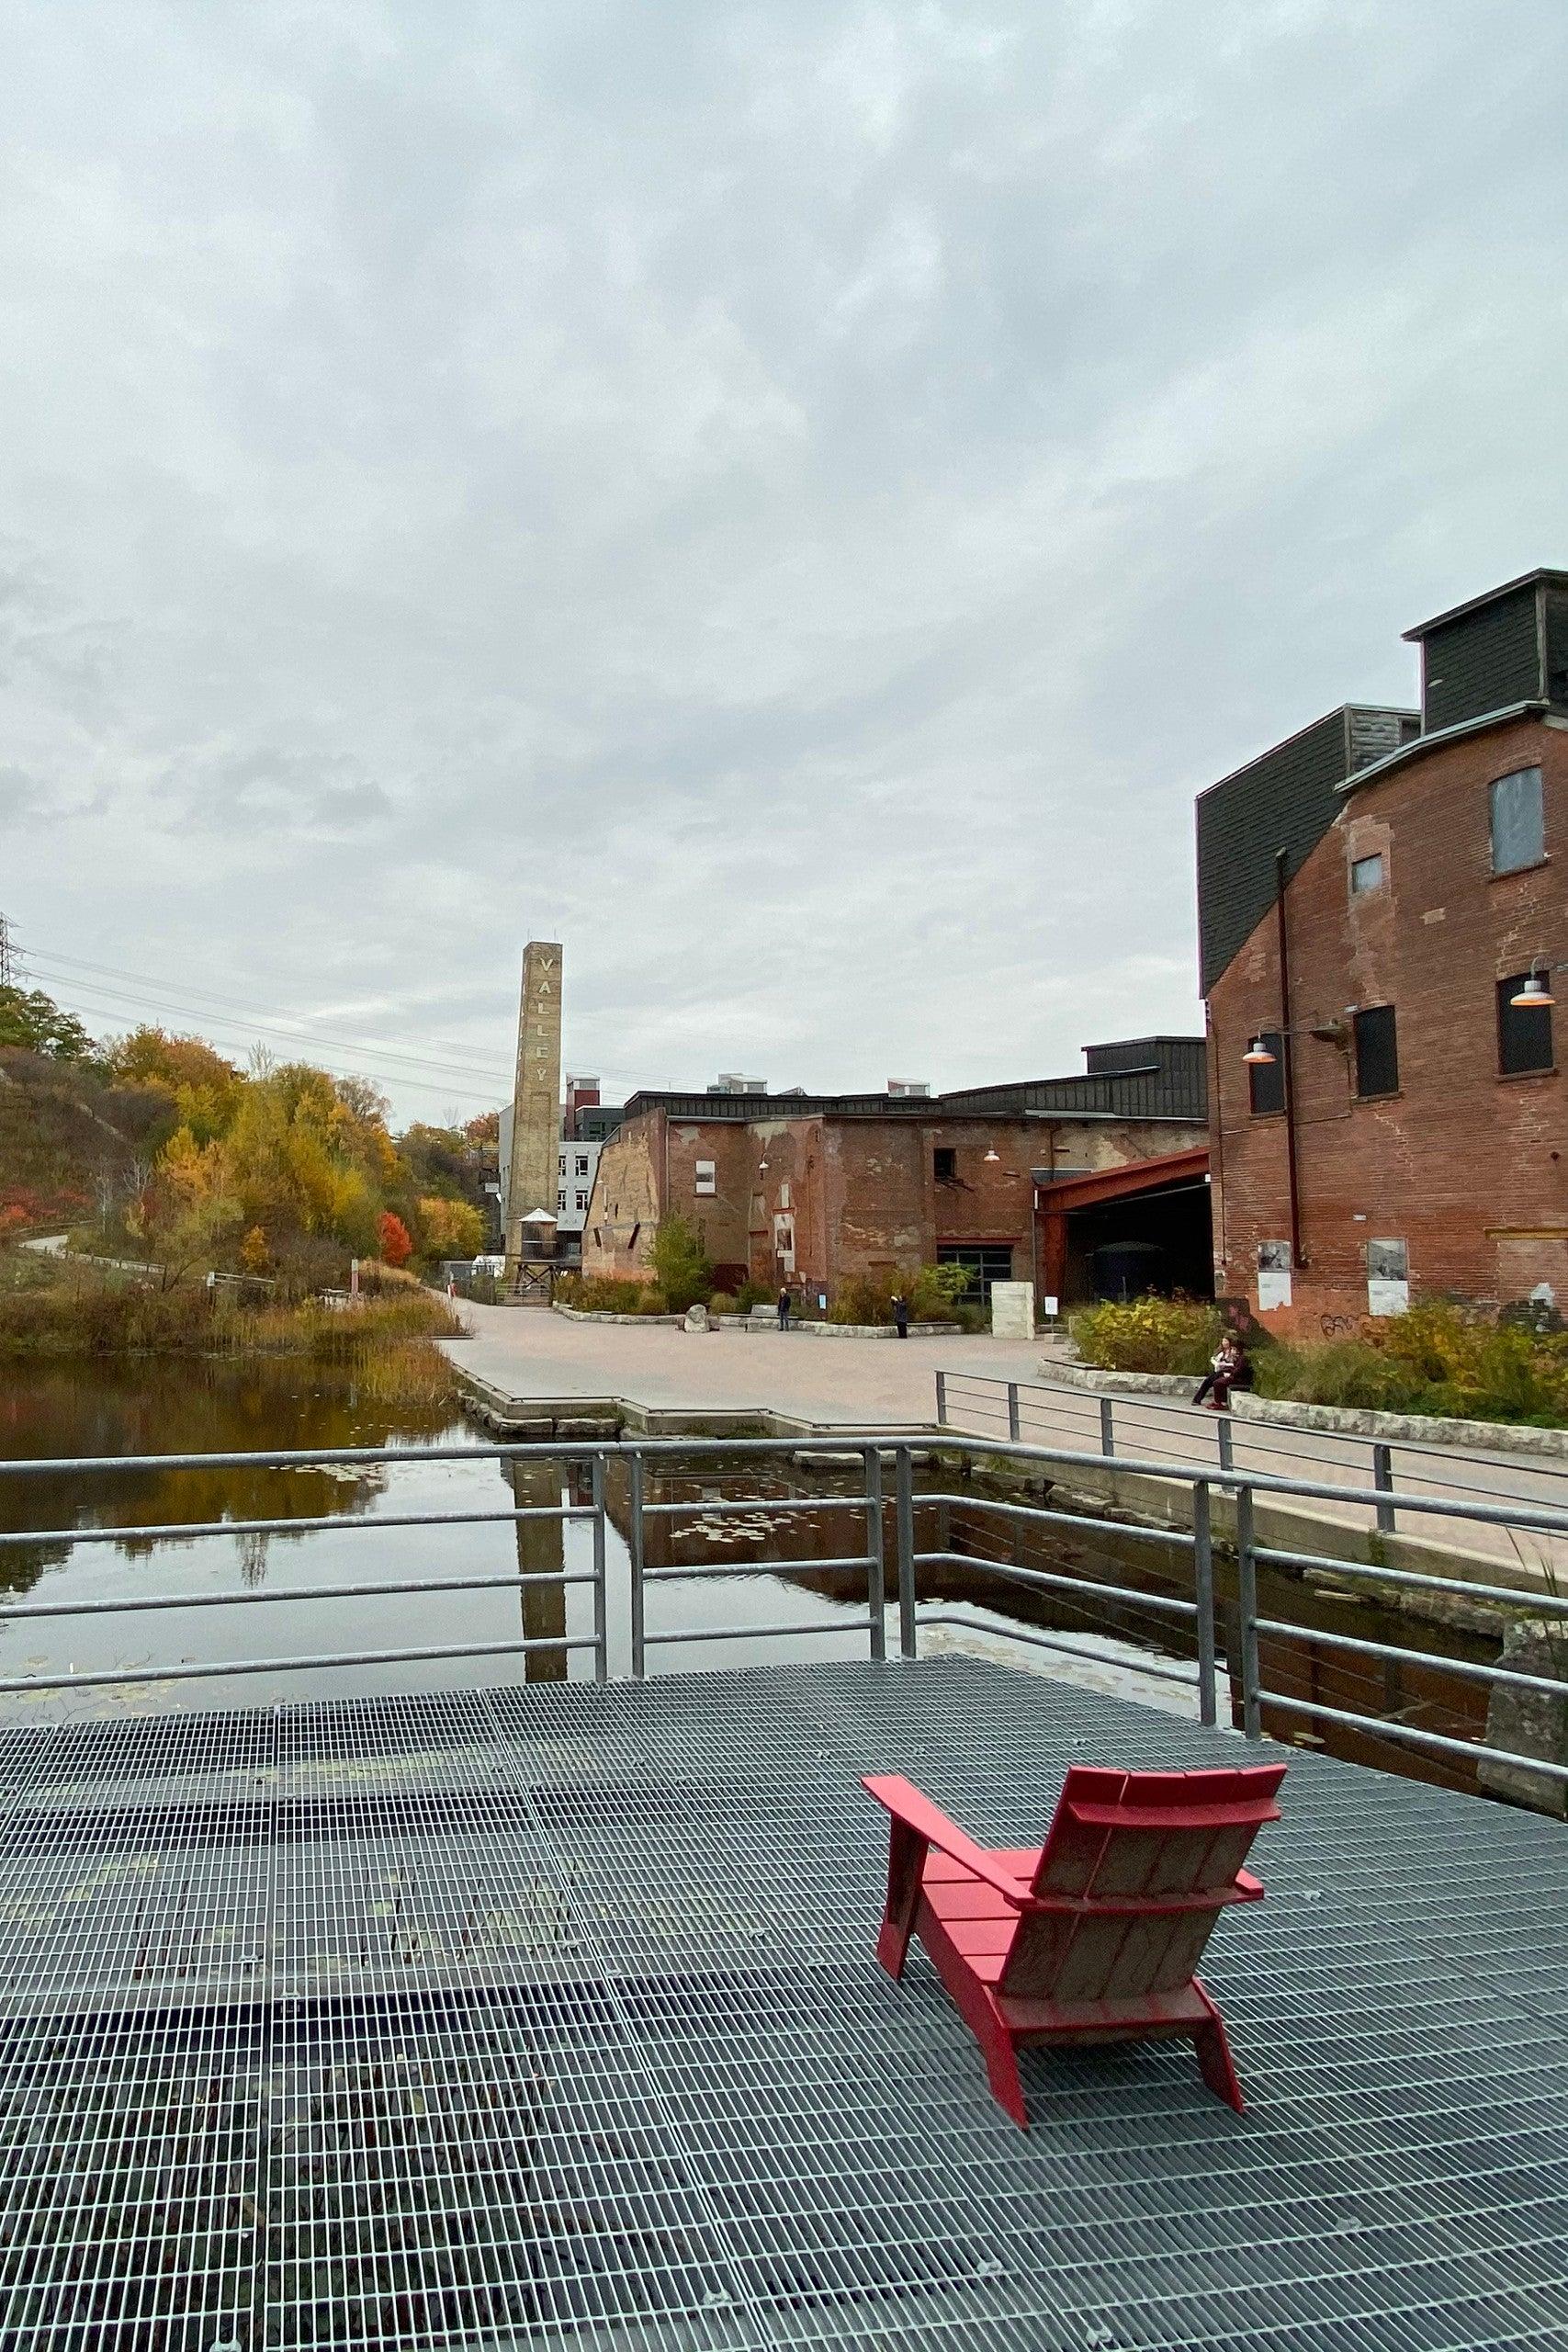 Pet Friendly Exploring the Don Valley Brick Works